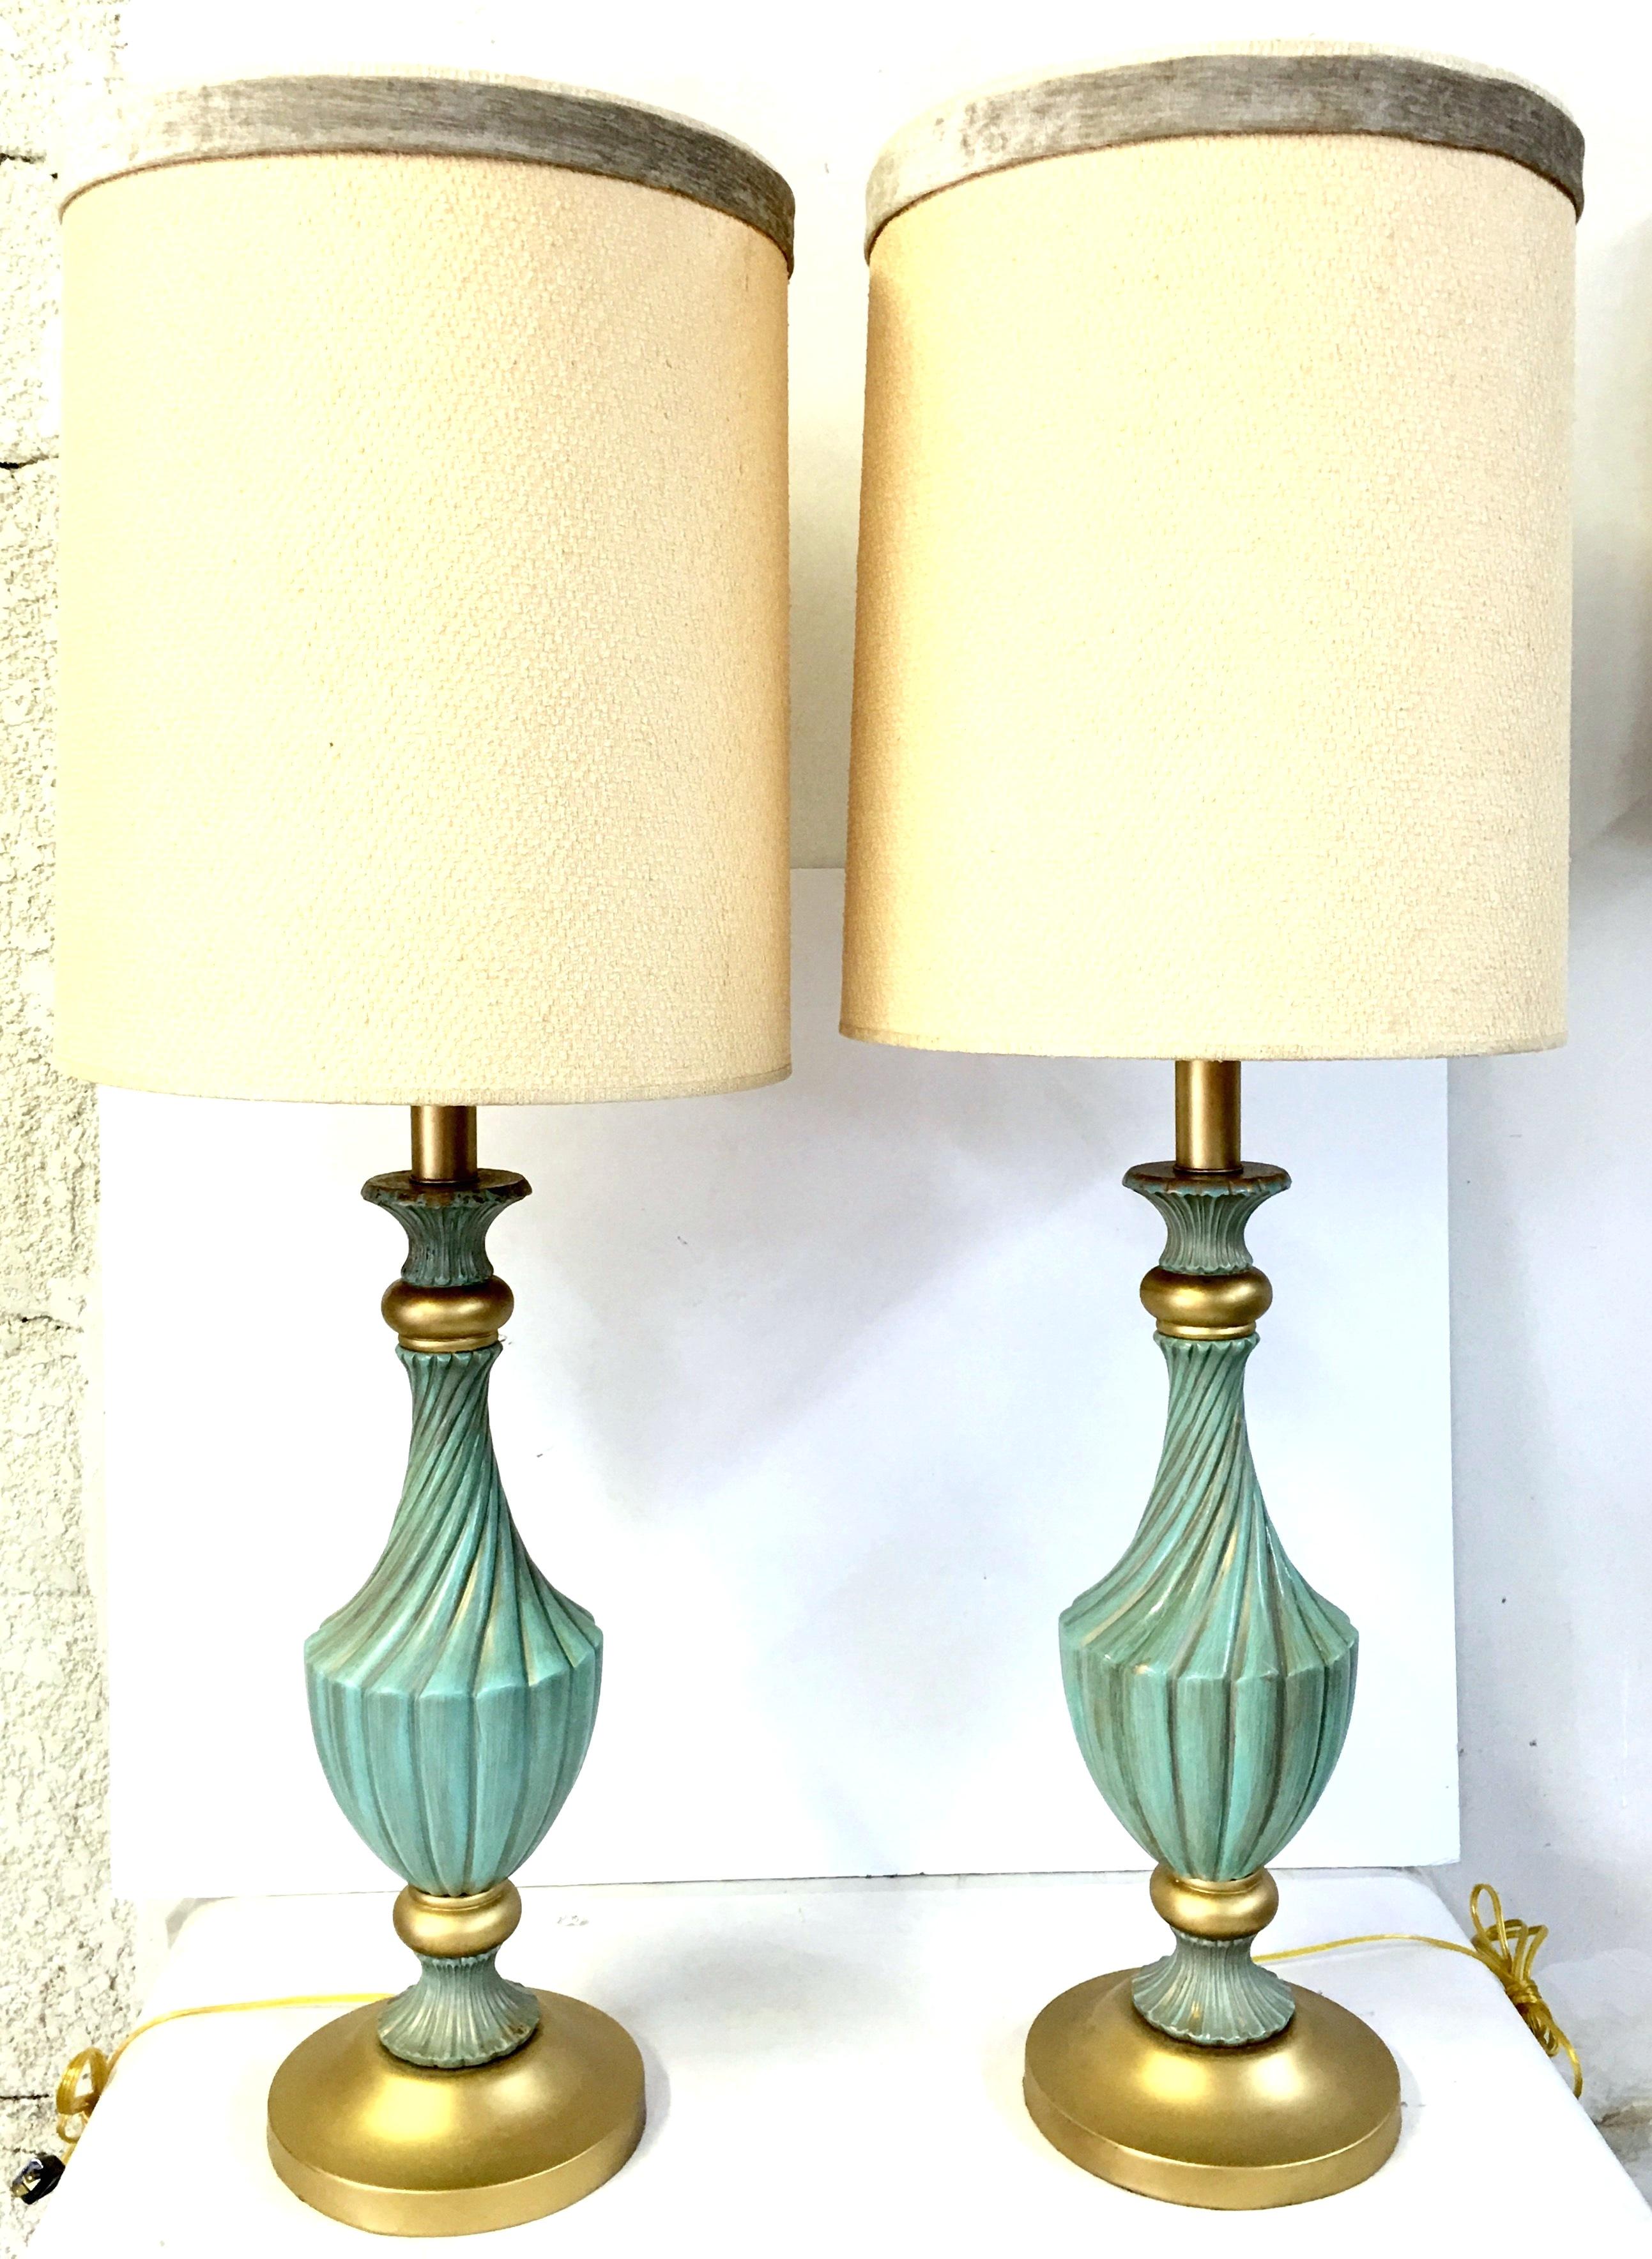 Mid-Century Neoclassical Style Pair Of Tall Aqua & Gold Ceramic, Wood And Gilt Brass Table Lamps By, Stiffel. Newly restored, converted to socket and harp style lamps with new electrical cords.  The classic and timeless tall lamps feature, ceramic